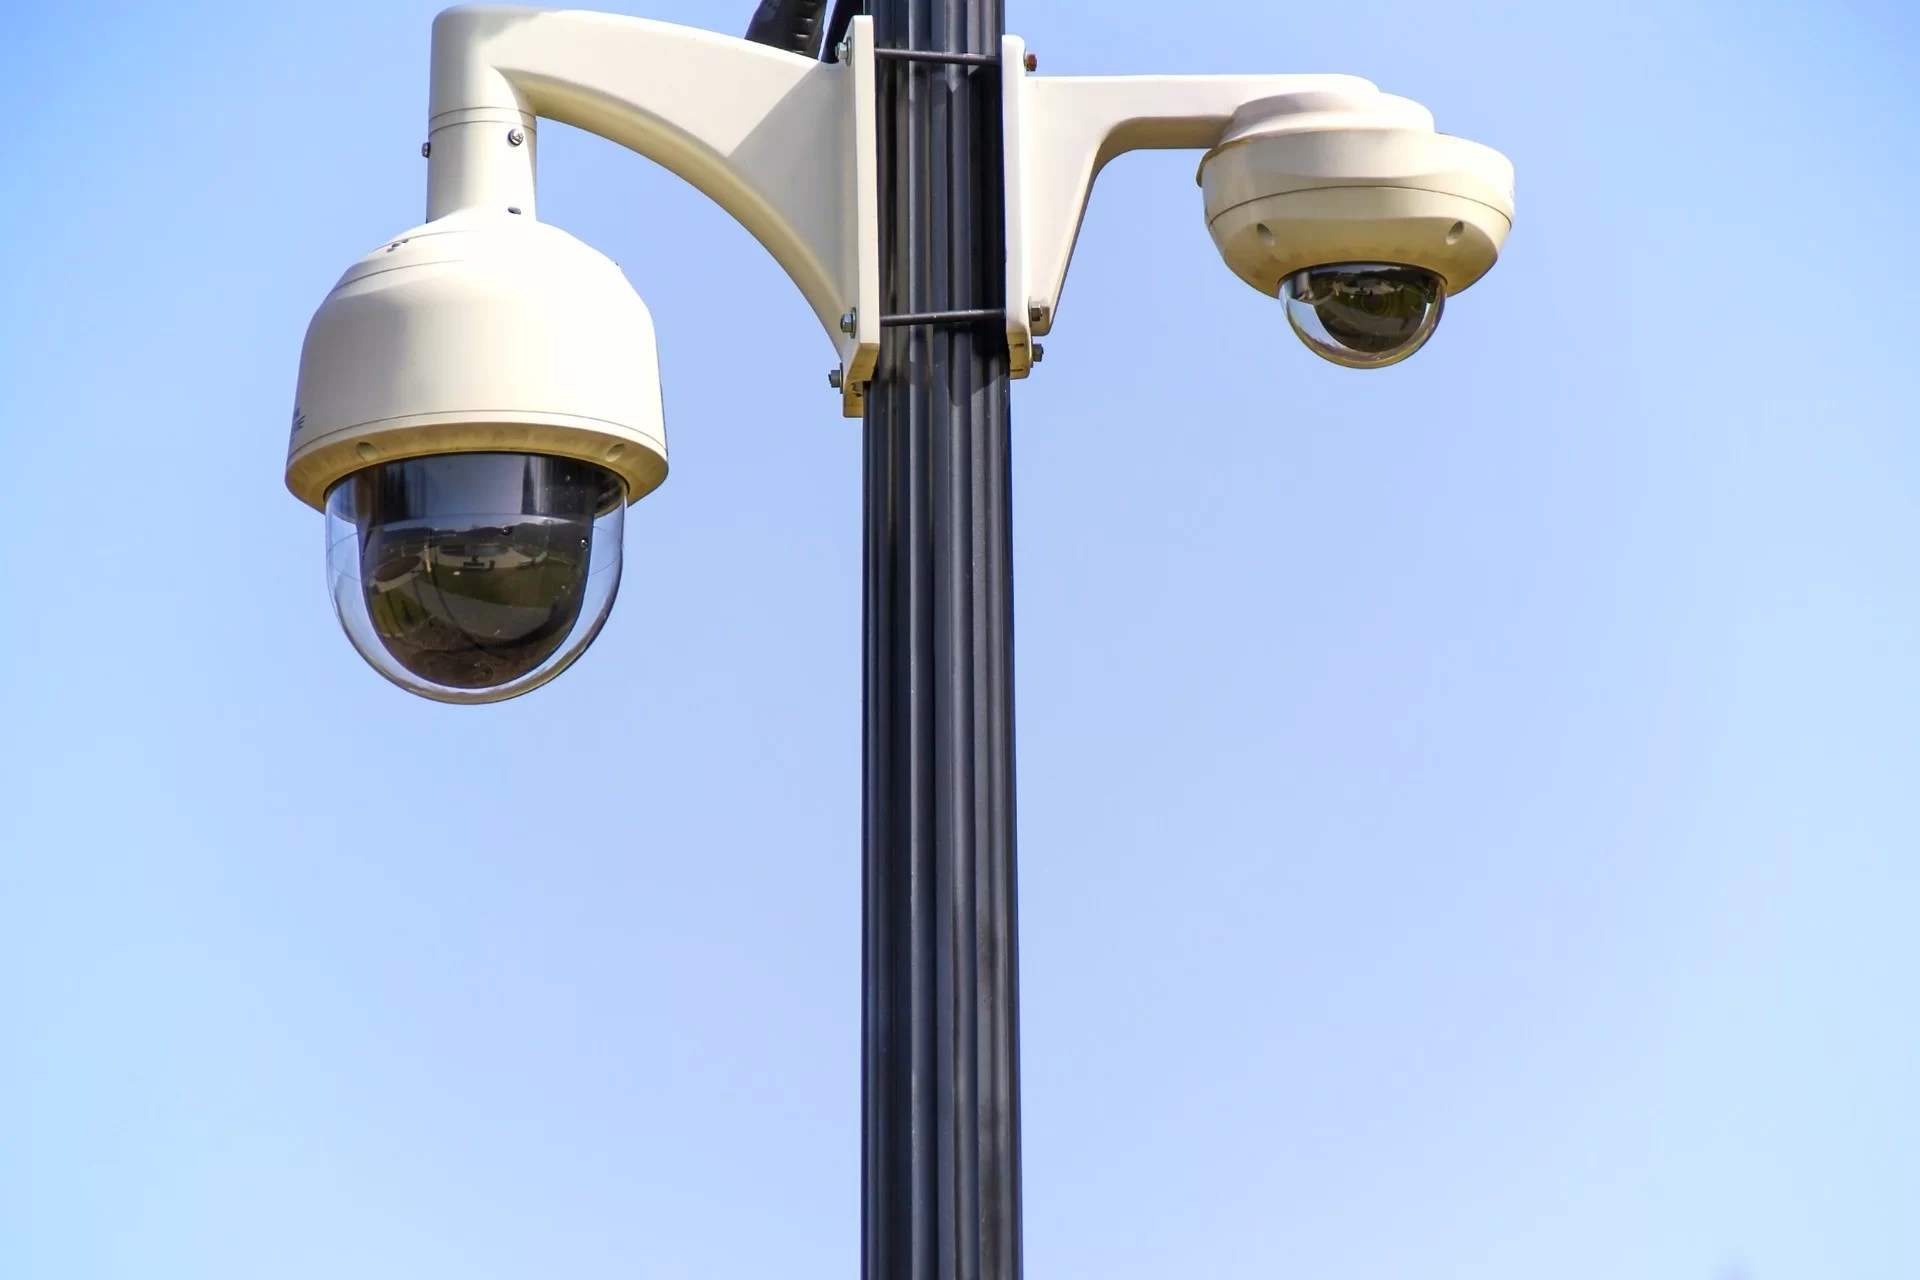 image - What Are the Types of Security Cameras?